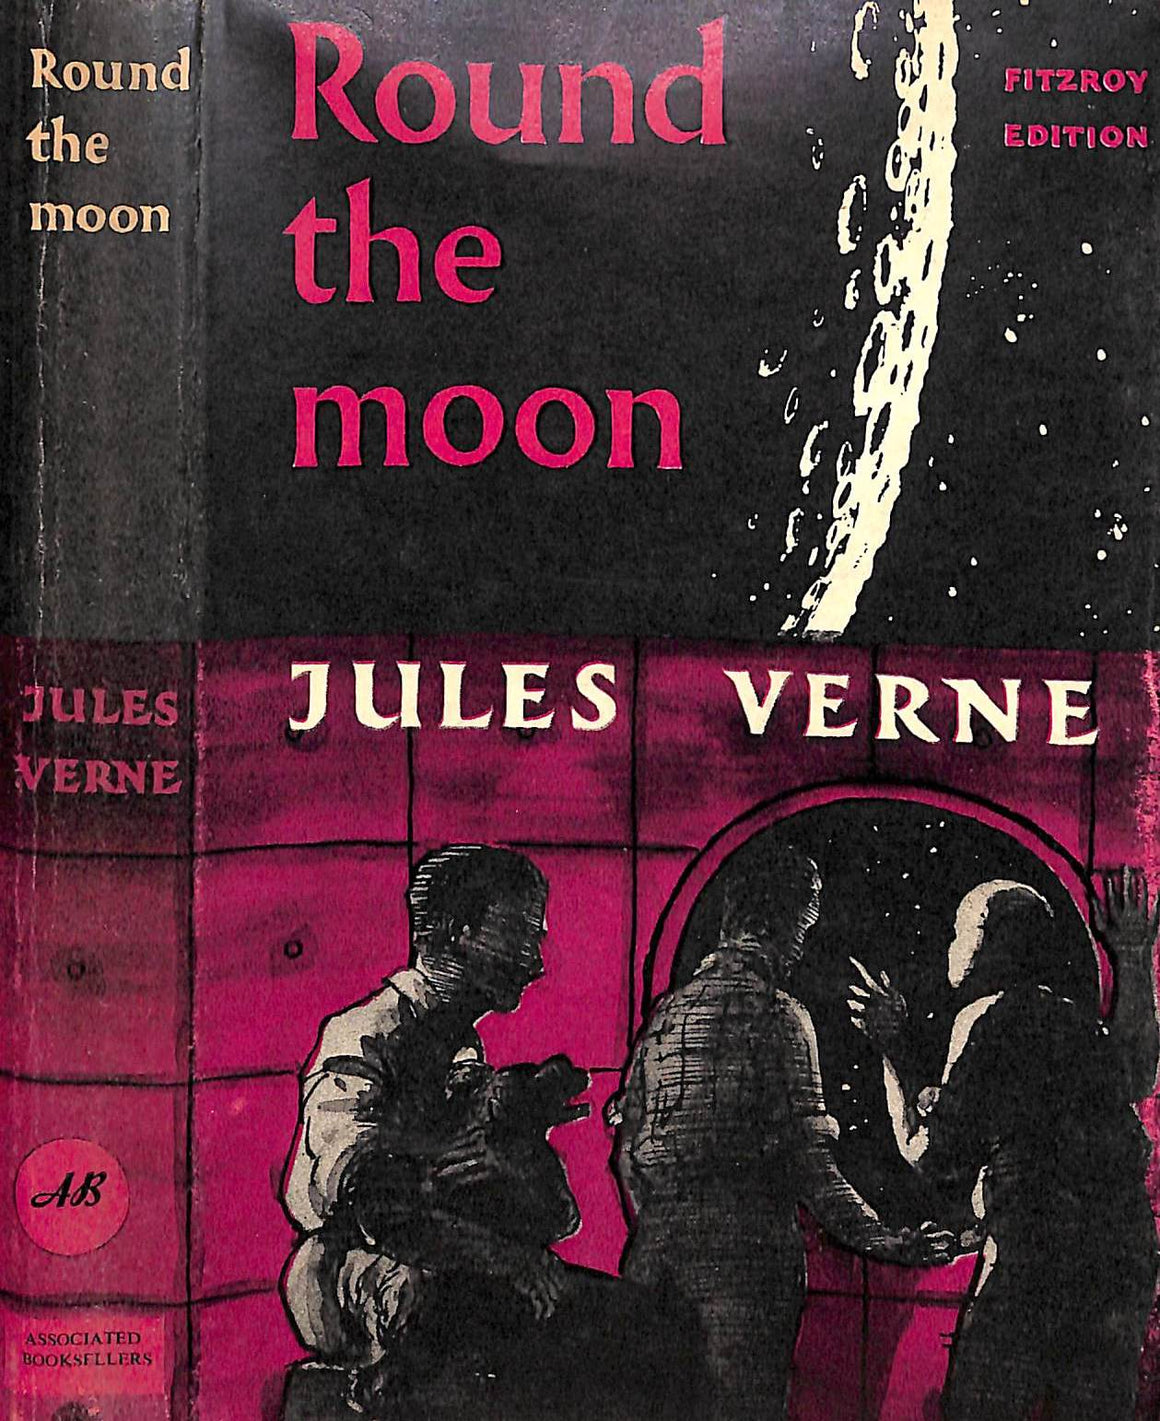 "Round The Moon" 1963 VERNE, Jules